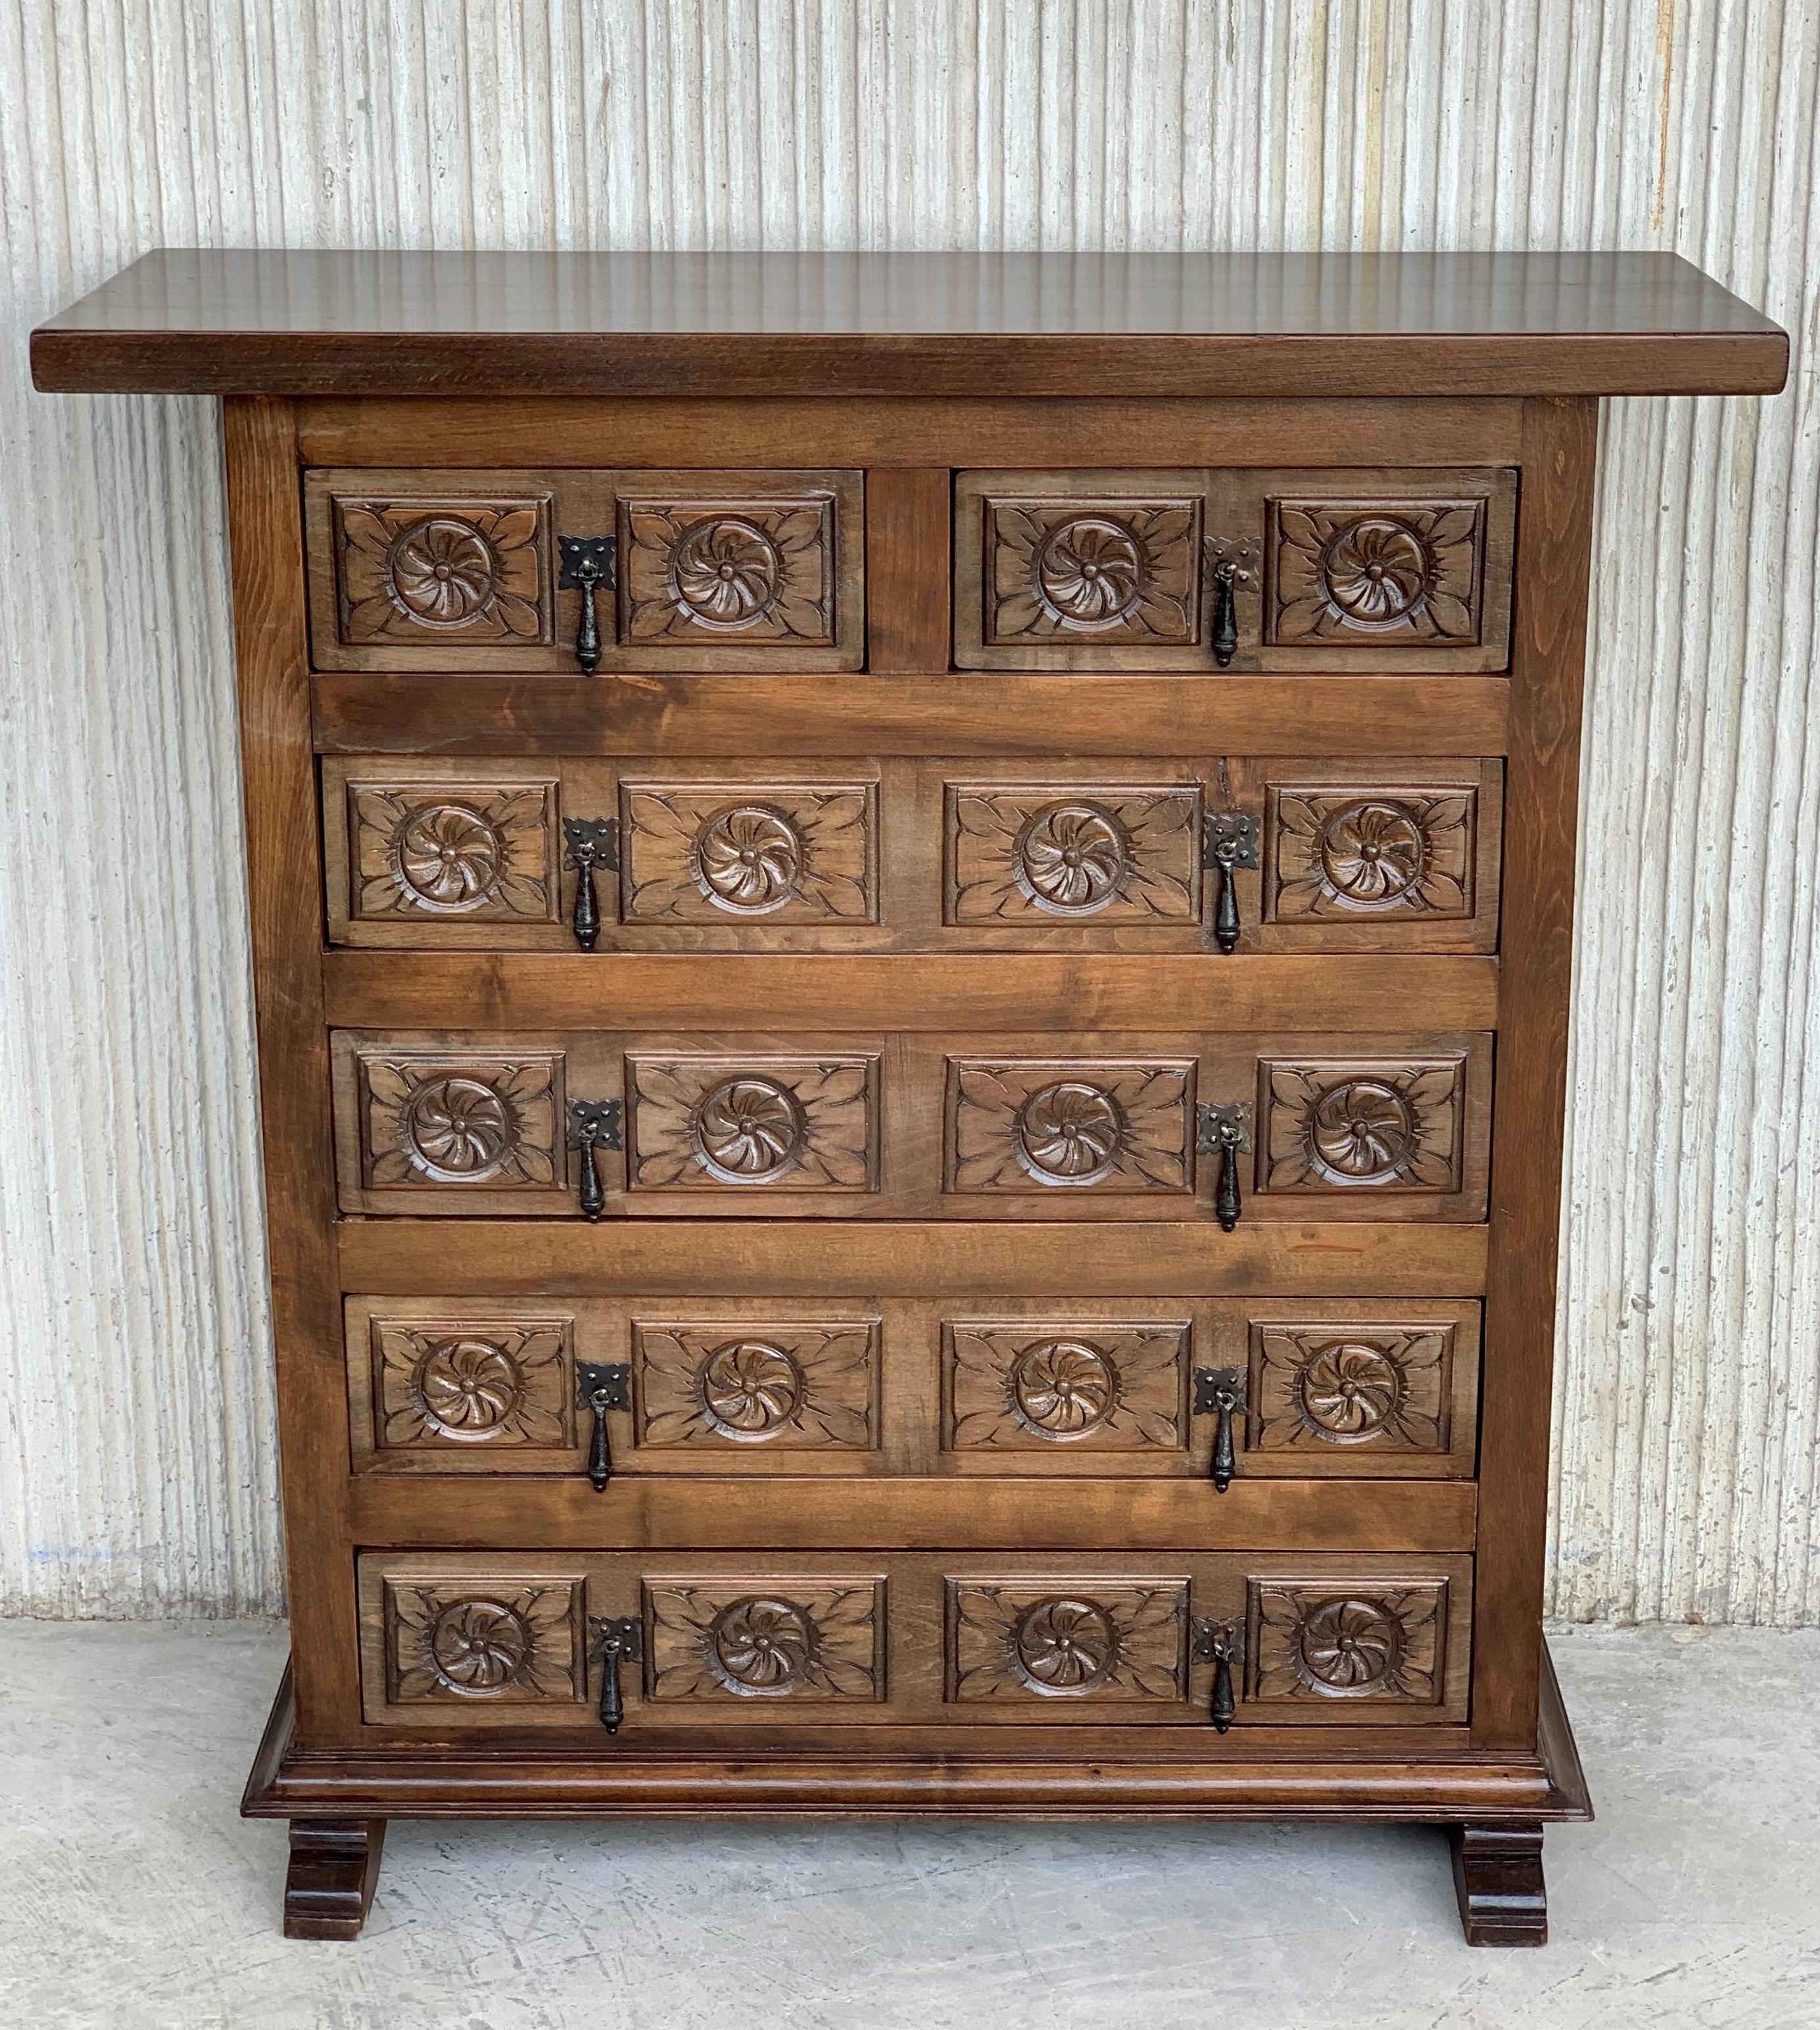 19th Catalan Spanish carved walnut chest of drawers, Highboy or Console
Country Provincial Chiffoniere was fashioned from solid walnut and features six drawers carved with charming detail and fitted with unusually intricate cast brass pulls,
circa